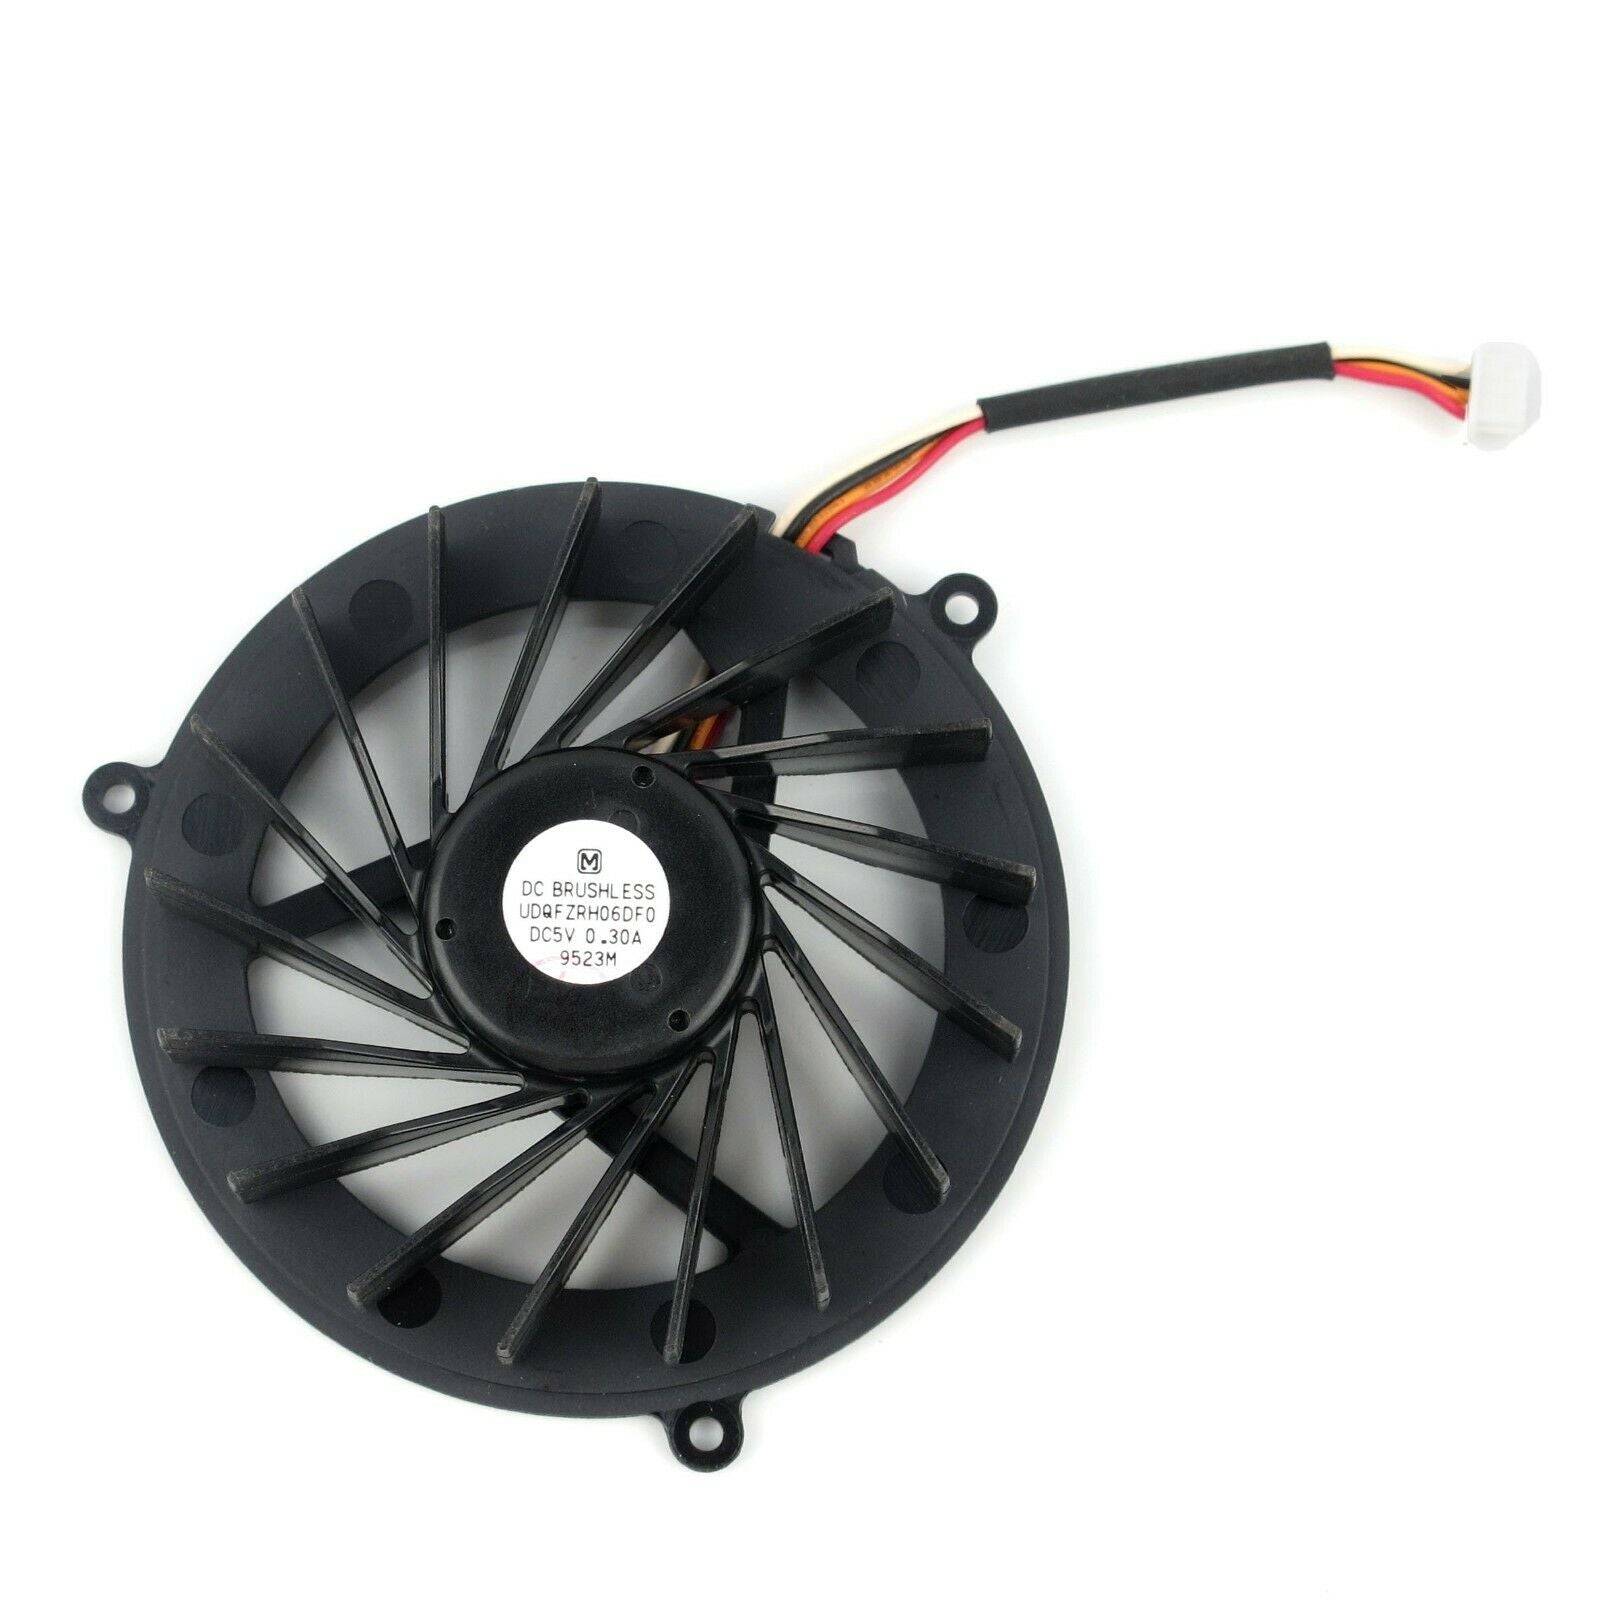 Sony UDQFZRH05DF0 New CPU Cooling Thermal Fan VAIO VGC-JS VPC-L UDQFZRH06DF0 UDQF2RH53DF0 UDQF2RH55DF0